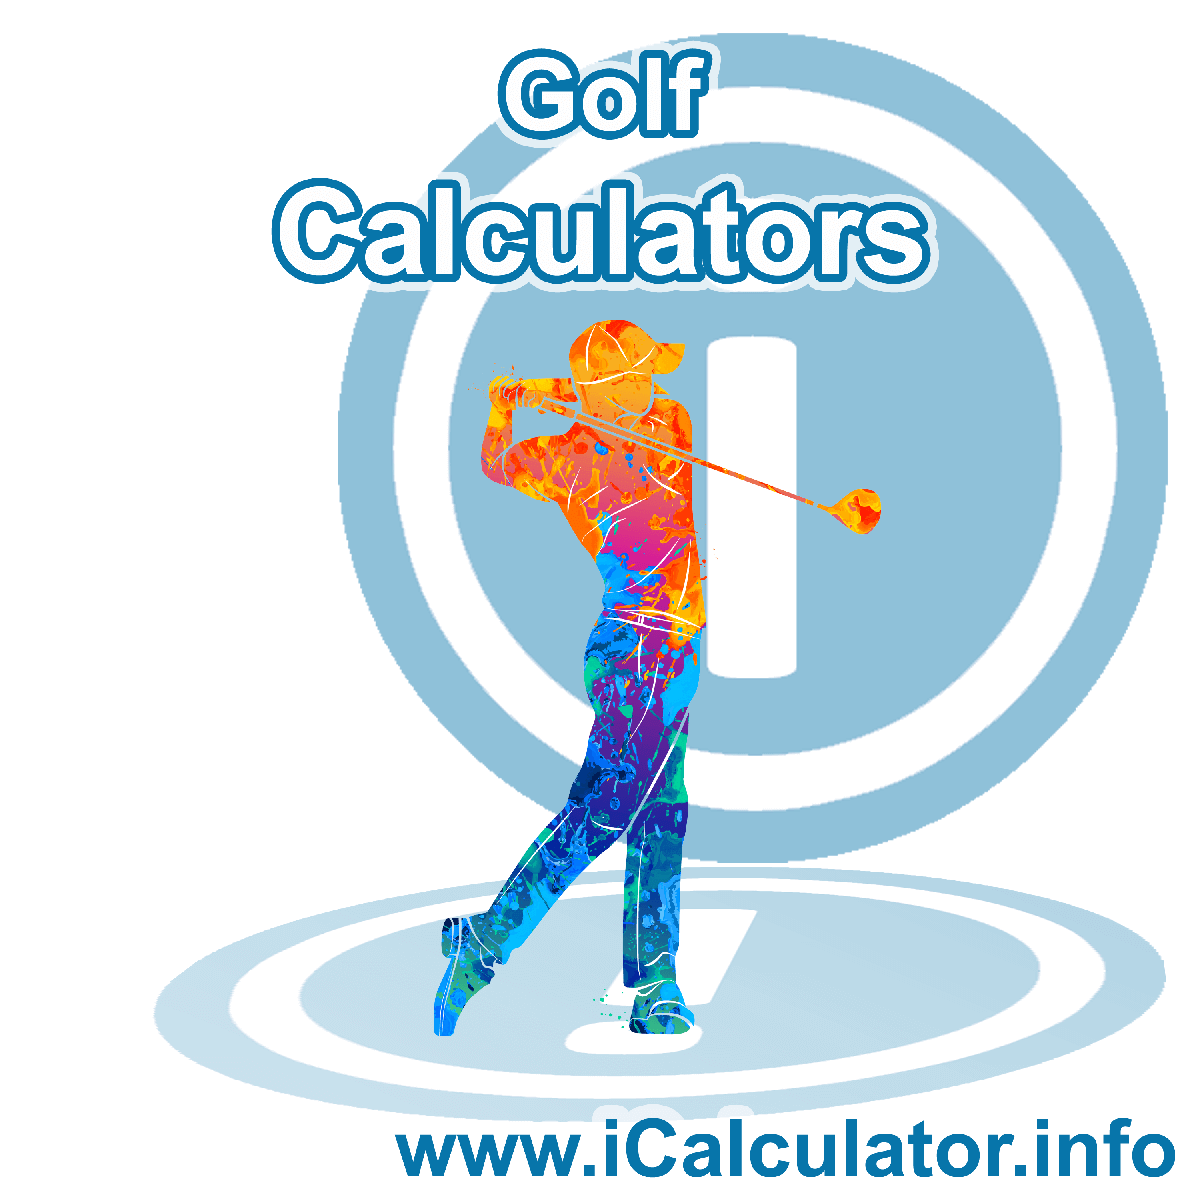 Golf Calculator. This image shows an Golf player playing golf - by iCalculator